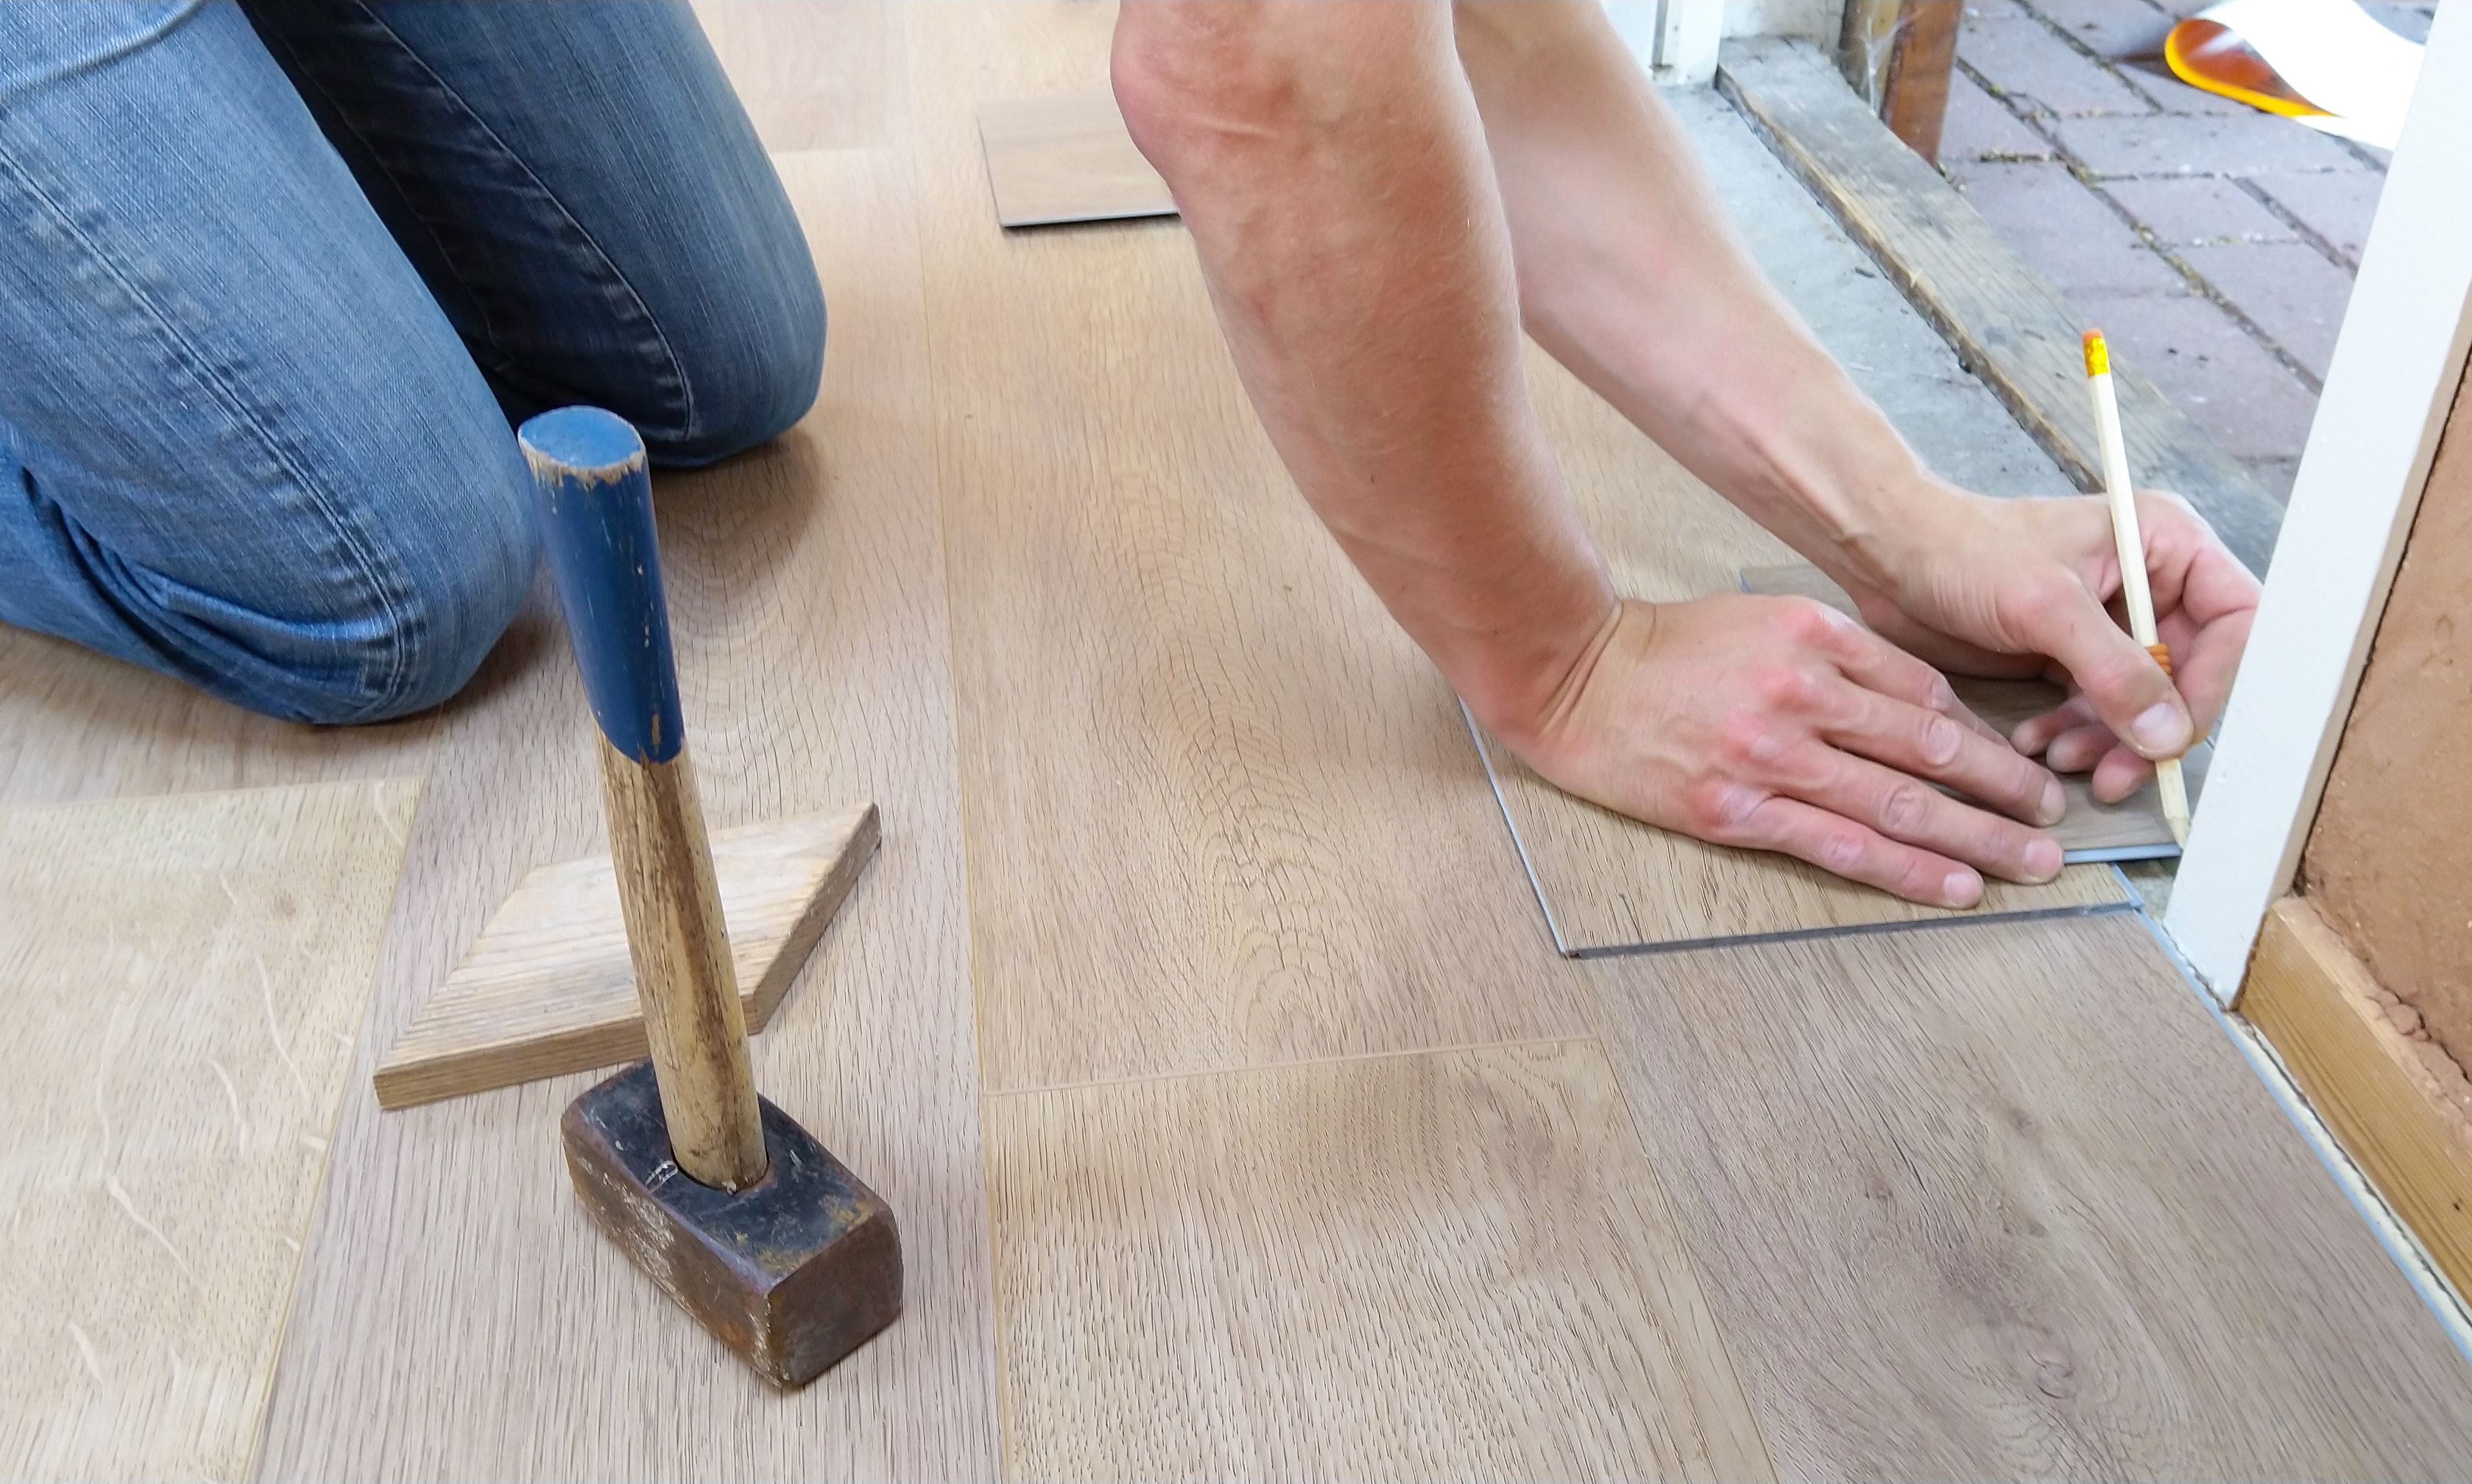 a person's hands on a wooden floor